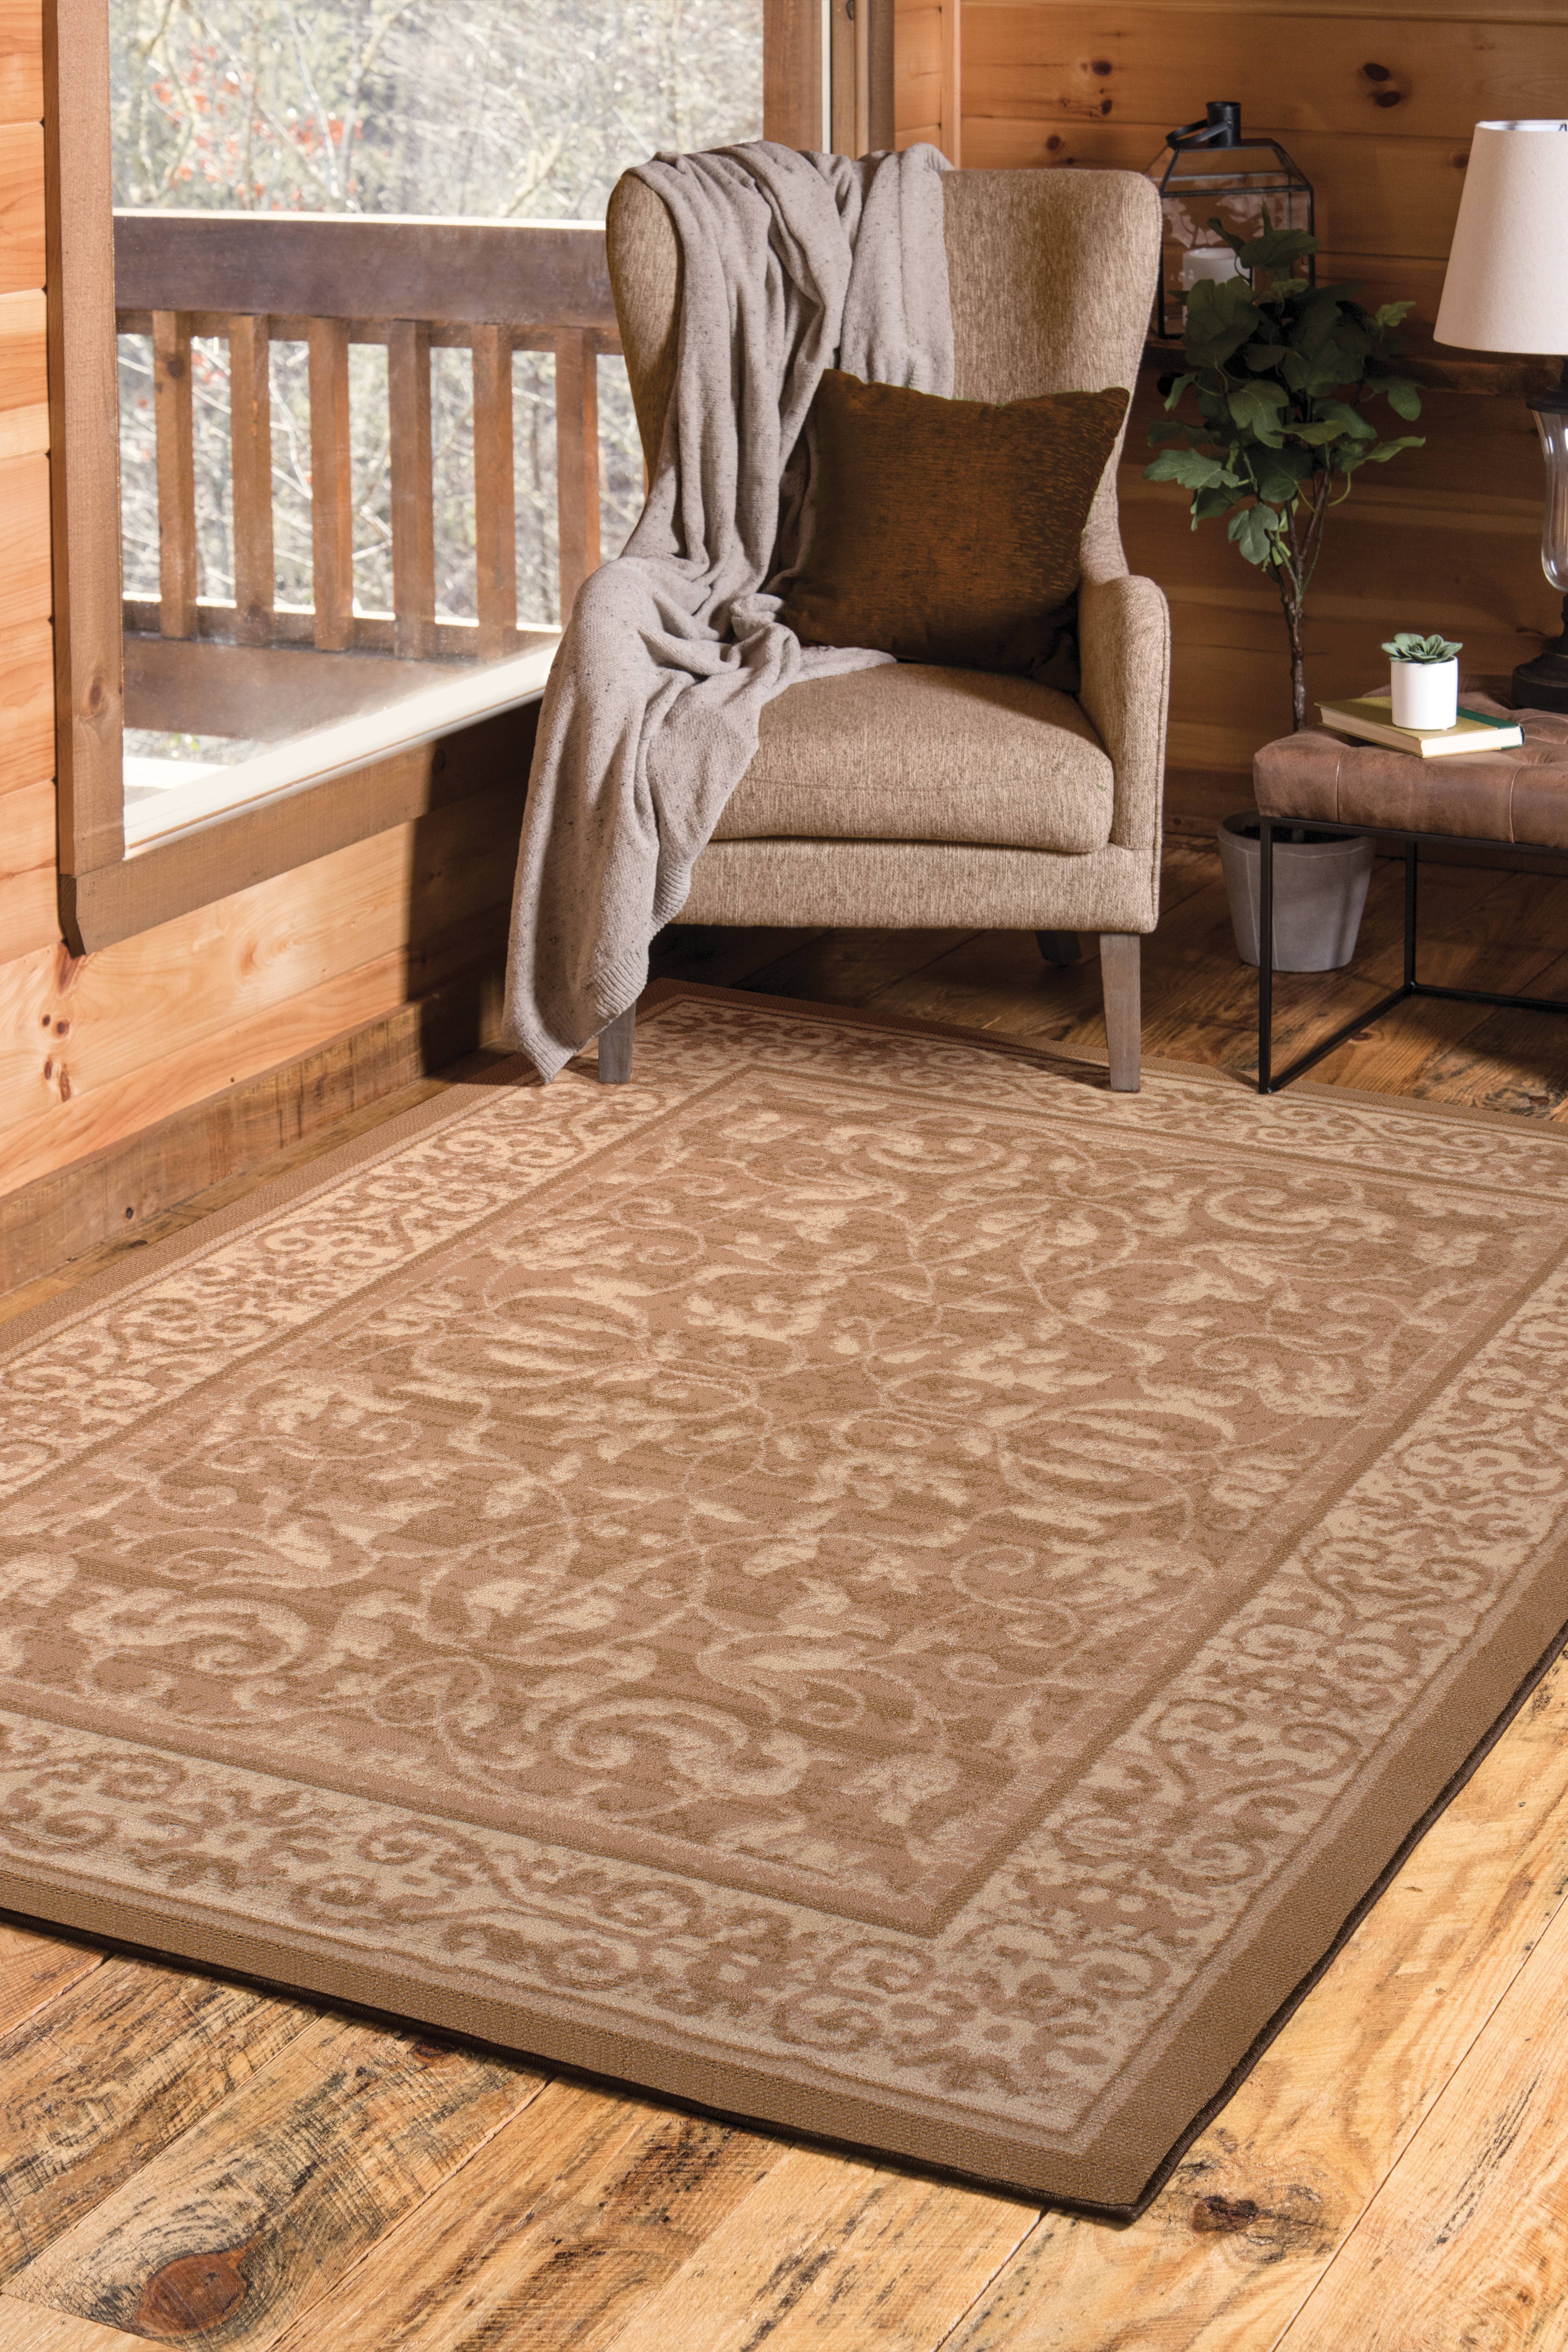 United Weavers Plaza Genevieve Accent Rug, Bordered Pattern, Beige, 1'11" X 3'3" - image 1 of 6